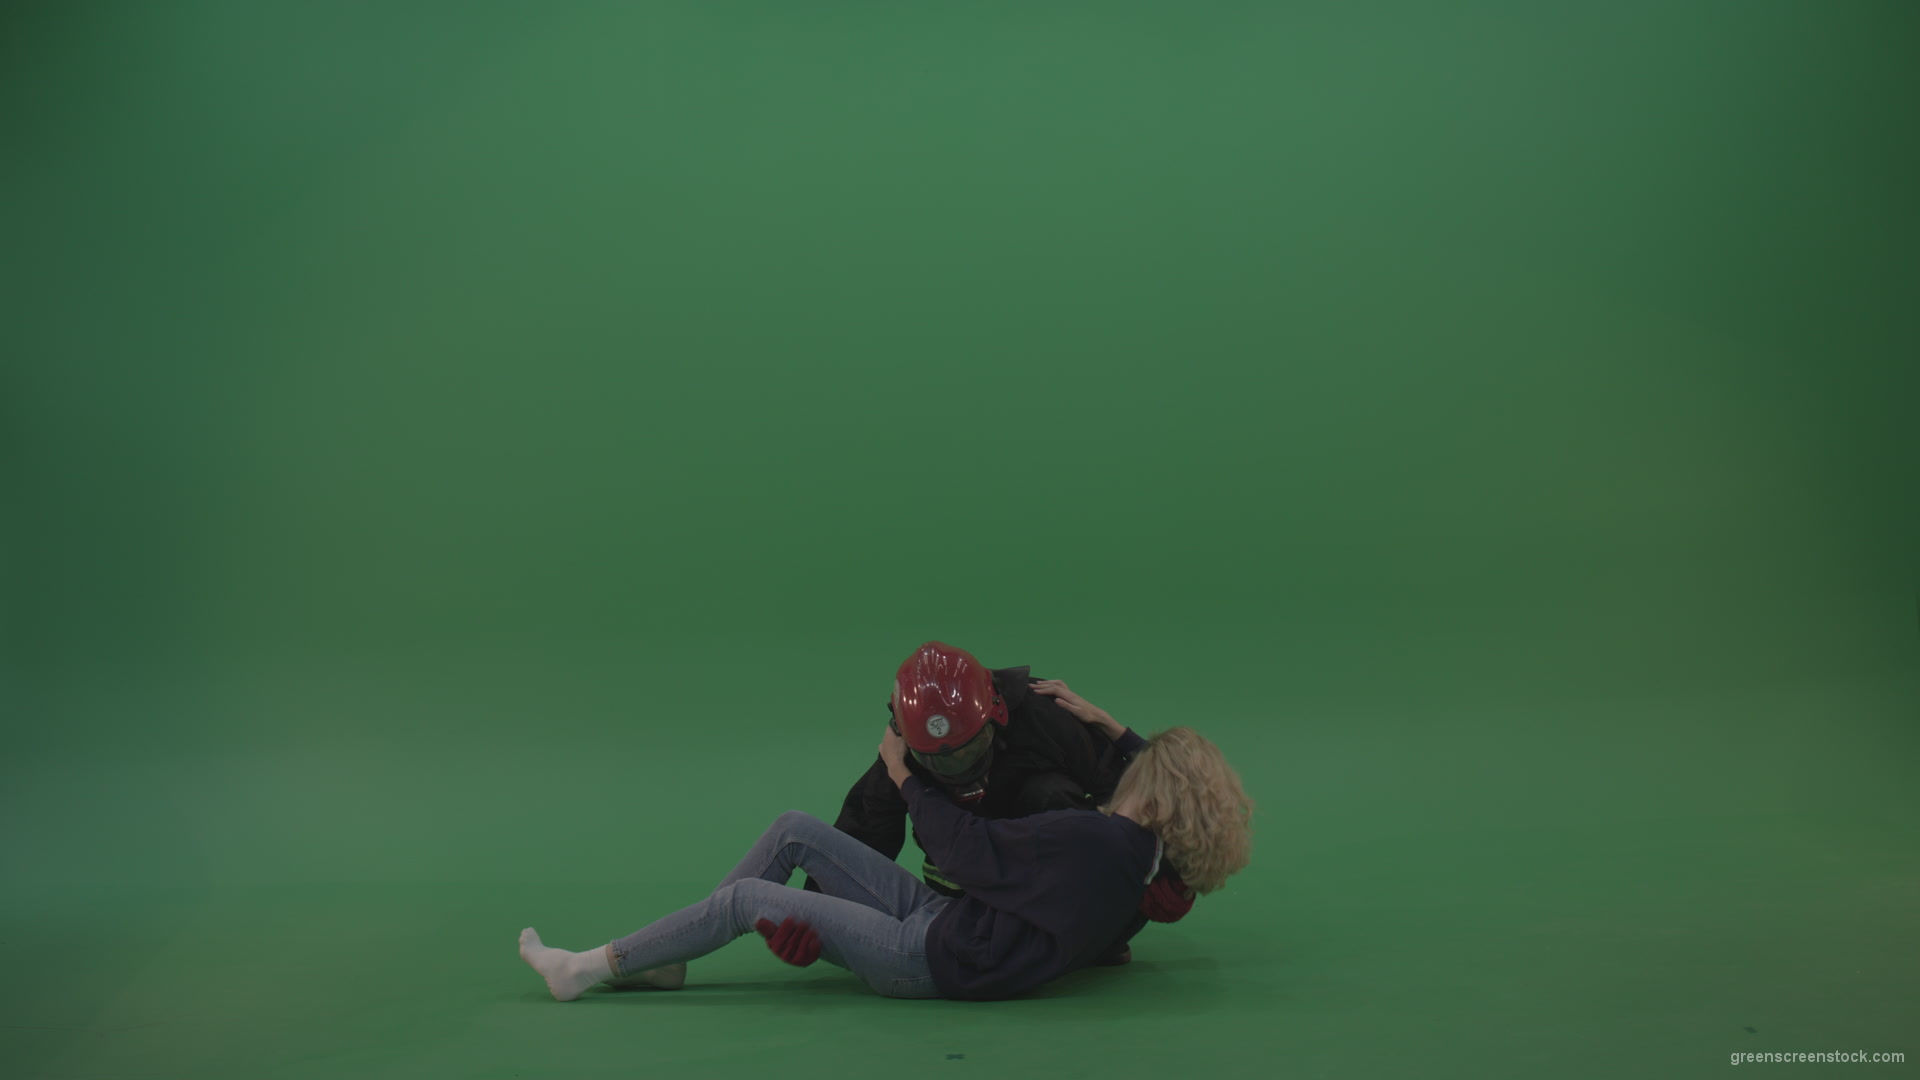 Brave_Fireman_Runs_To_Unconscious_Young_Victim_Girl_Slightly_Wakes_Her_Up_Takes_On_Strong_Hands_And_Carries_Towards_Safety_On_Green_Screen_Wall_Background_006 Green Screen Stock